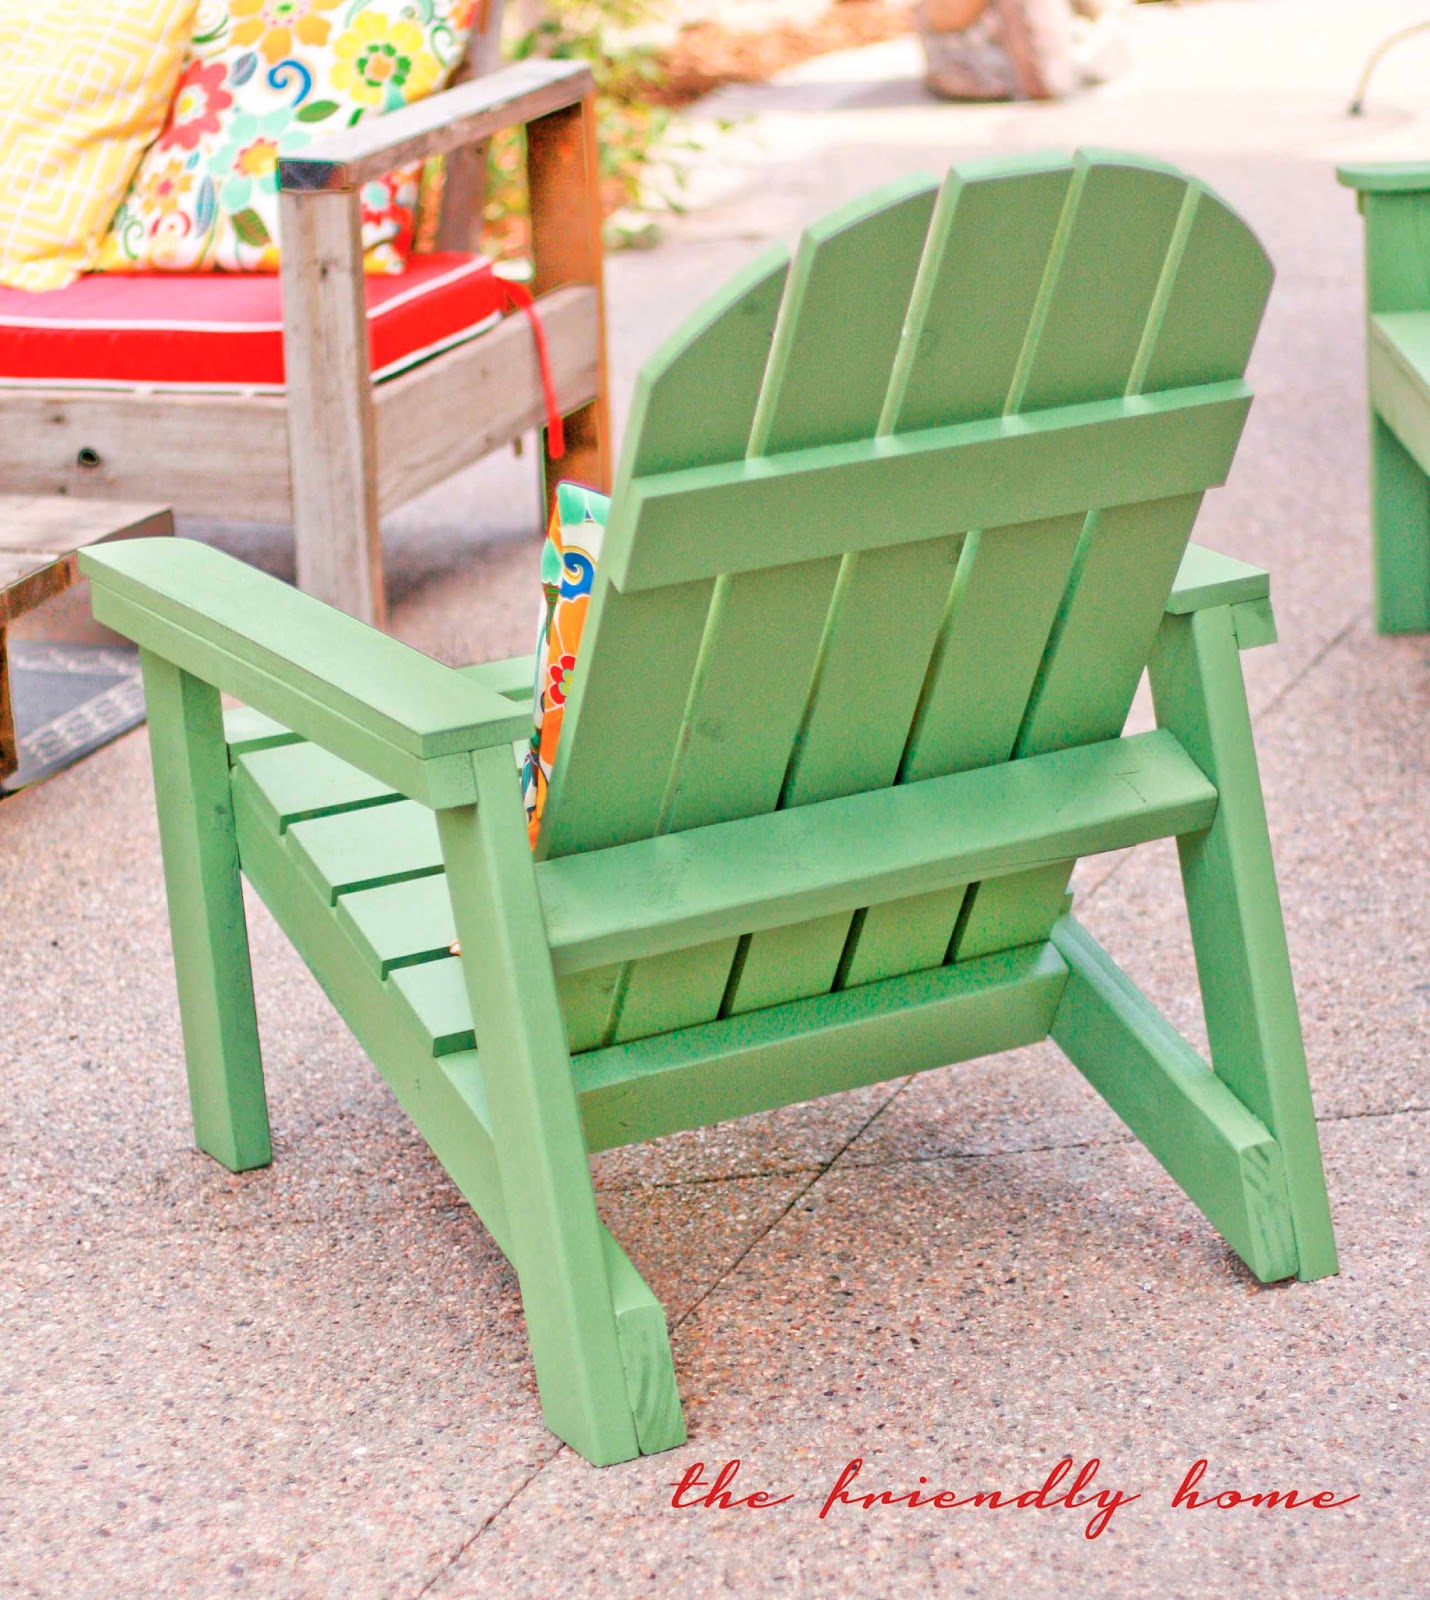 The Home Front: Local take on the classic Adirondack chair